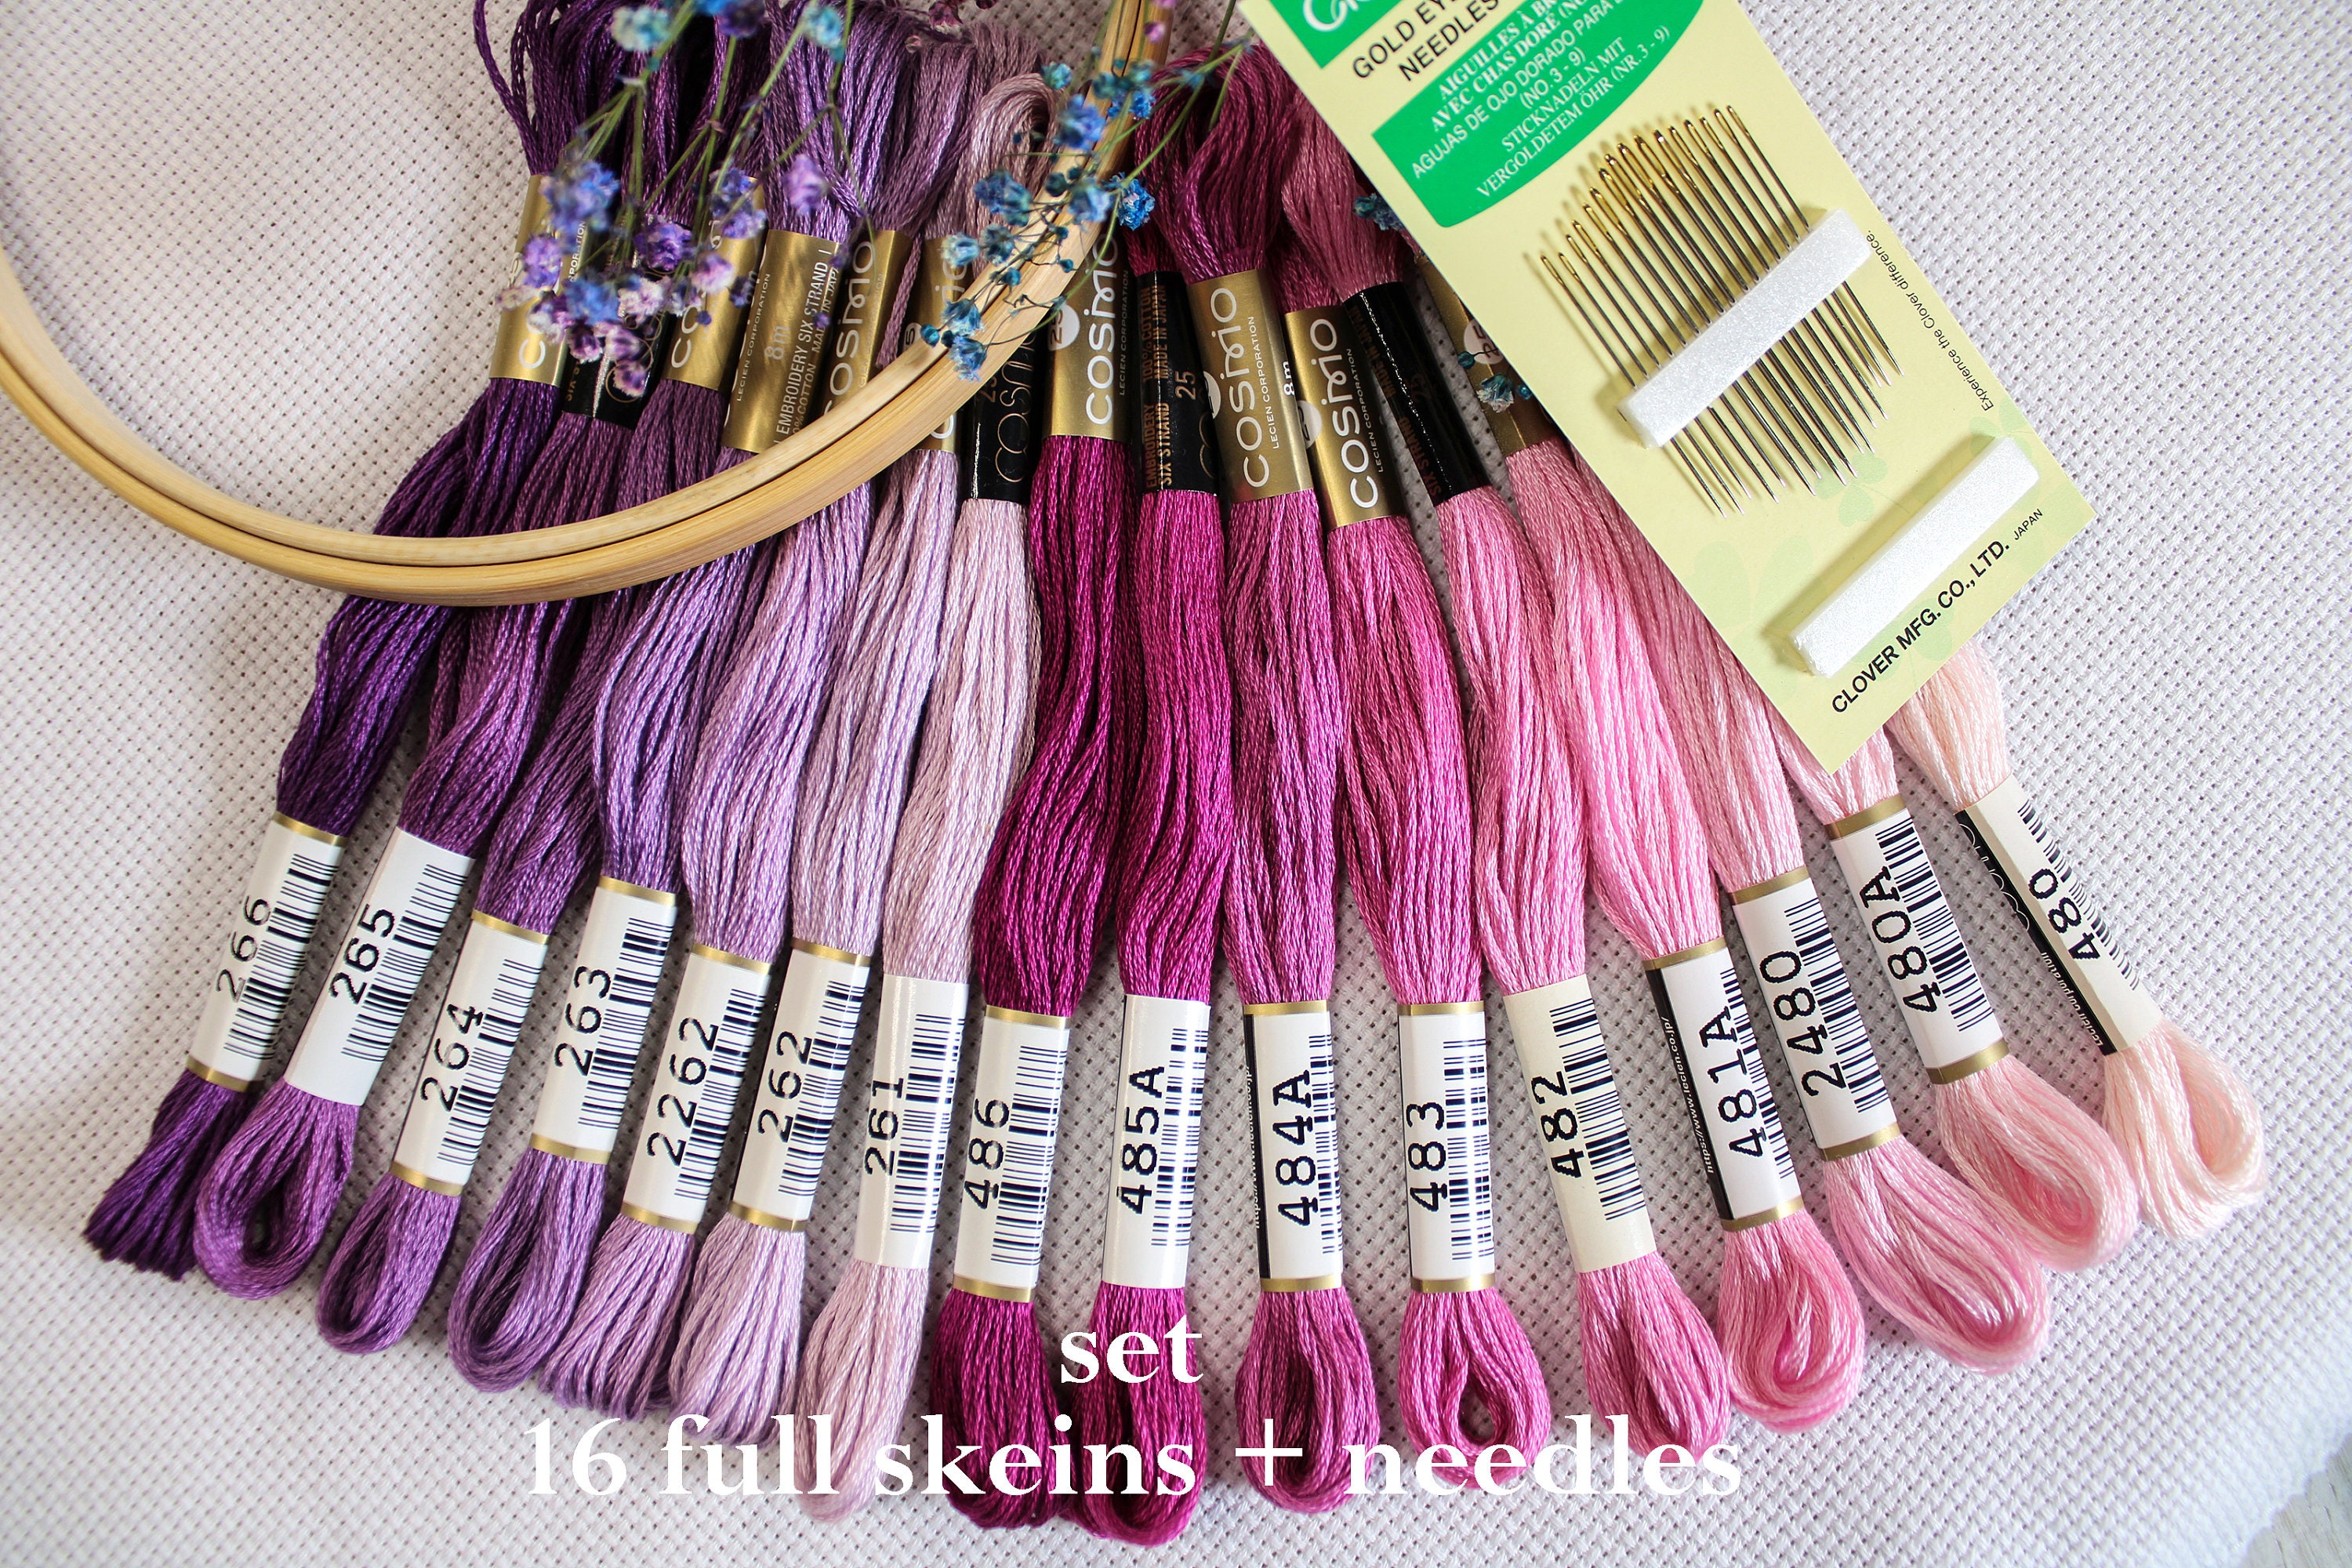 cosmo-embroidery-floss-bundles-cosmo-thread-set-needles-etsy